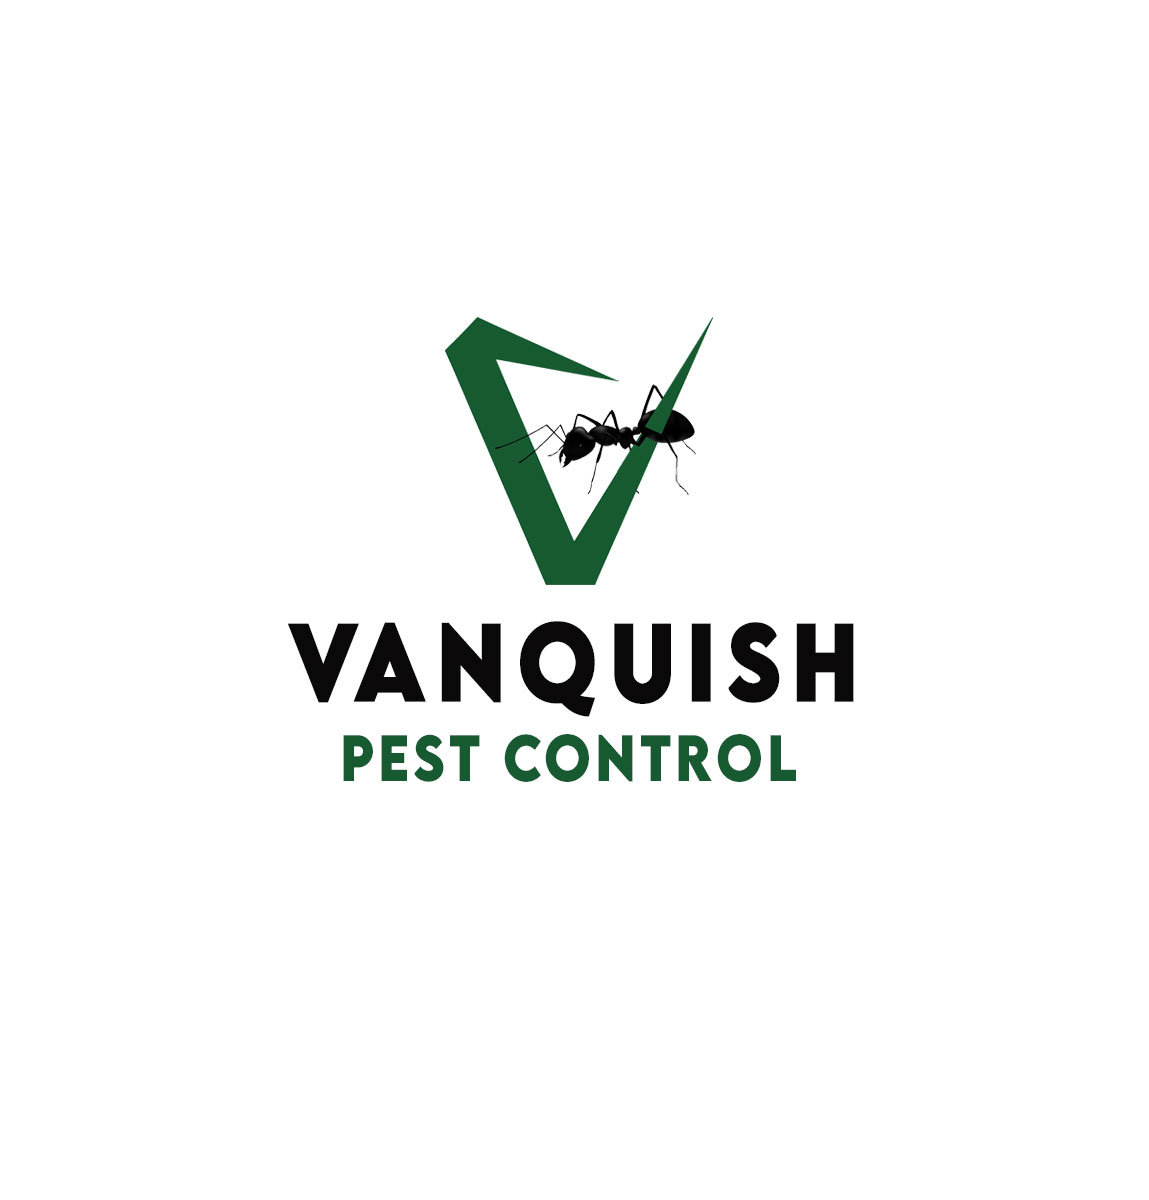 Vanquish Pest Control Expand Their Cockroach Extermination Service Across Ontario